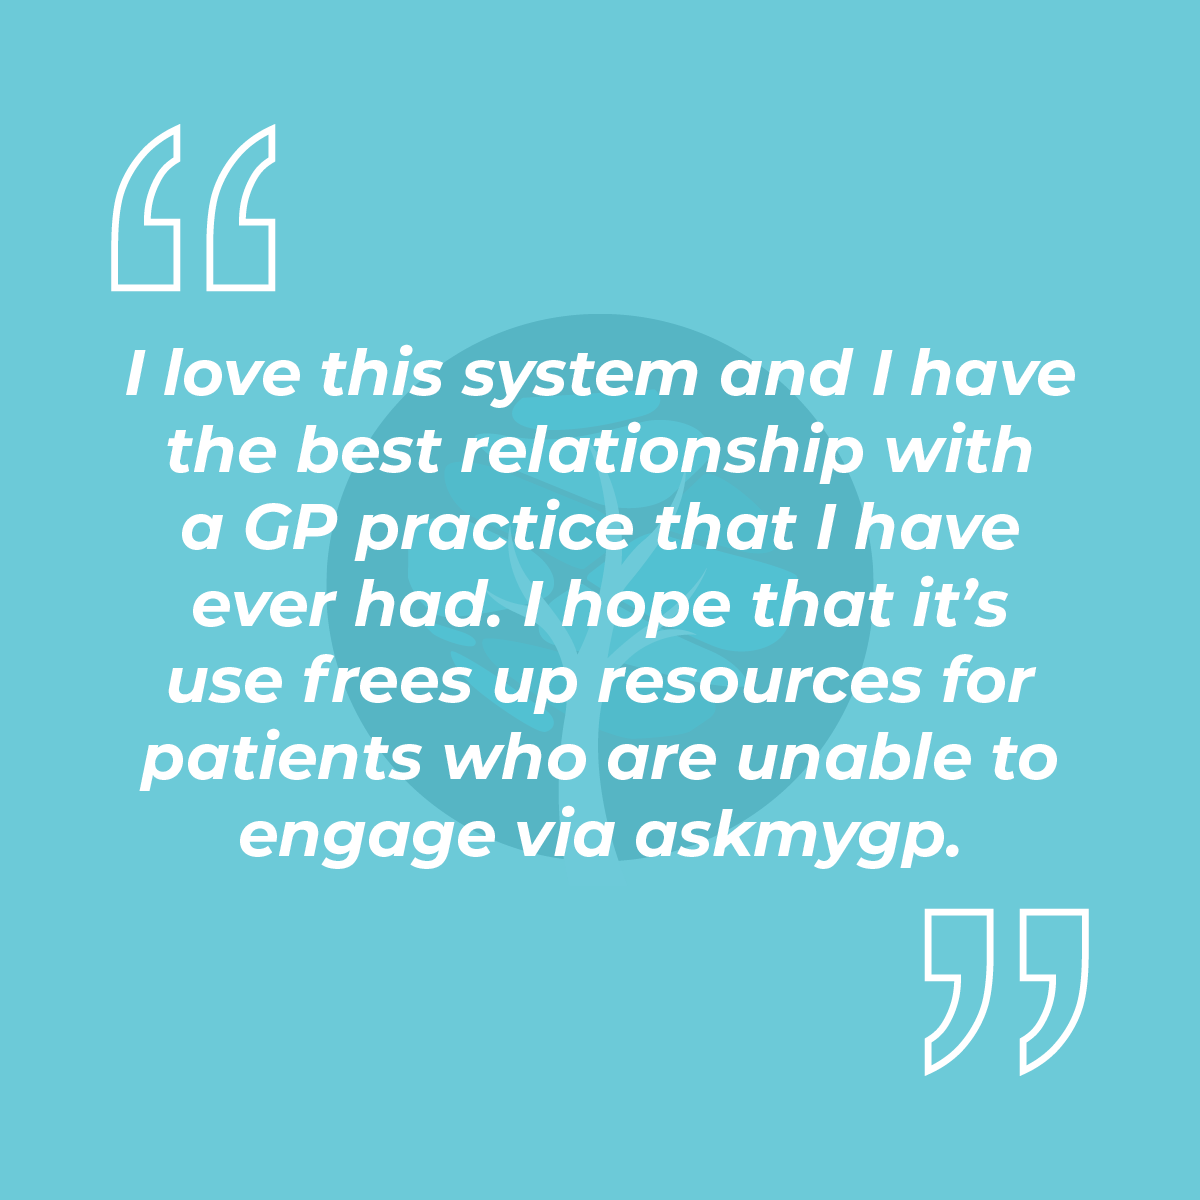 I love this system and I have the best relationship with a GP practice that I have ever had. I hope that it's use frees up resources for patients who are unable to engage via askmygp.